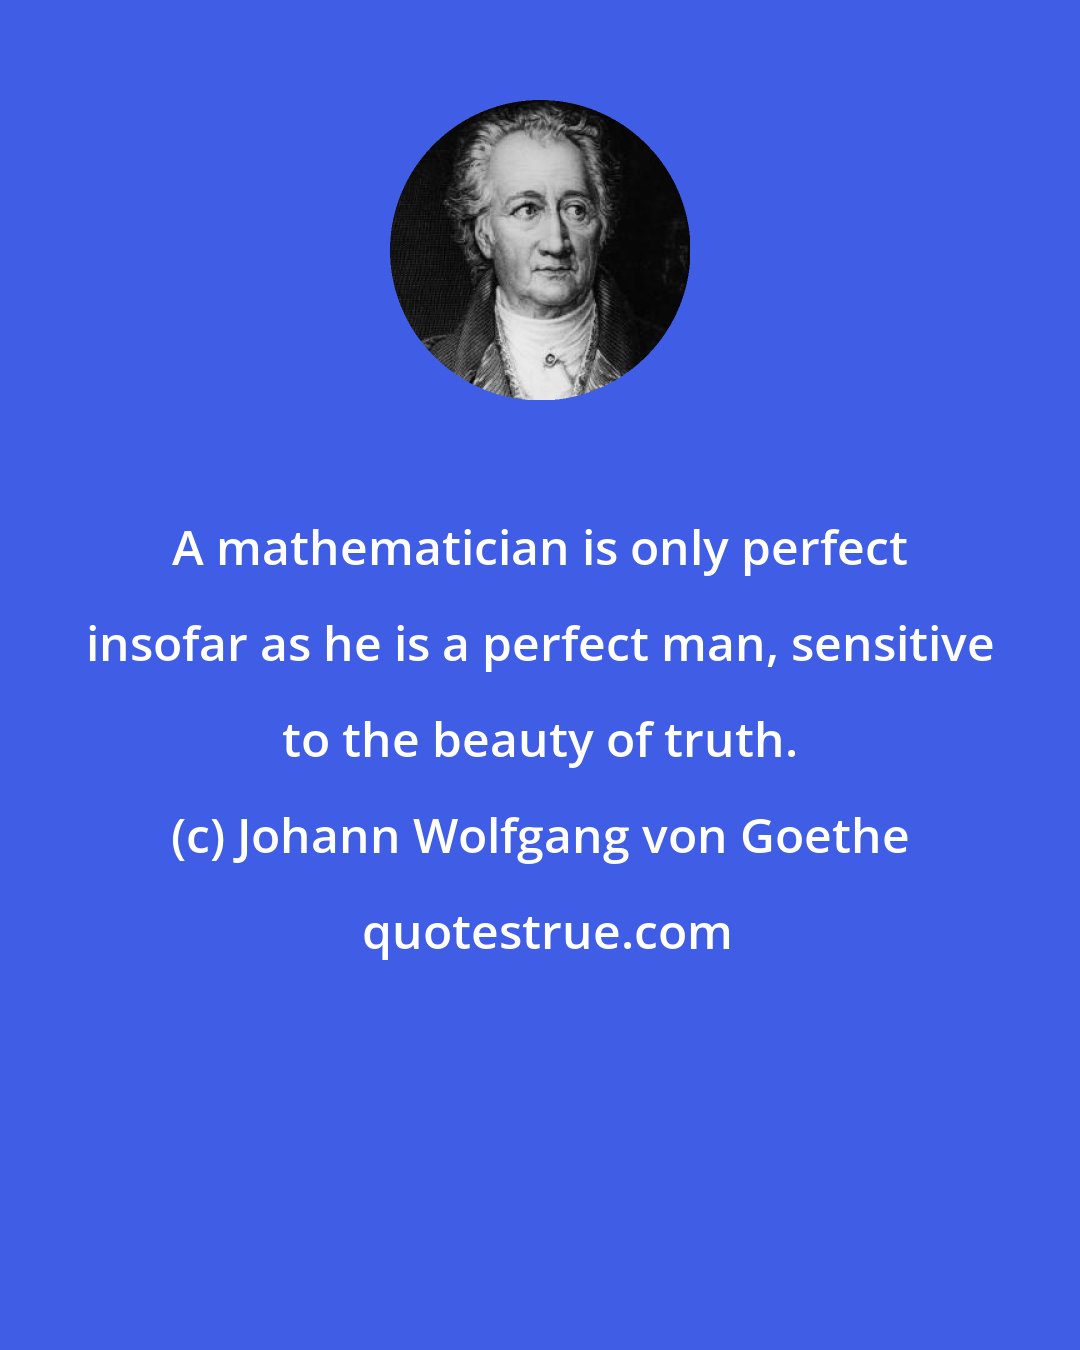 Johann Wolfgang von Goethe: A mathematician is only perfect insofar as he is a perfect man, sensitive to the beauty of truth.